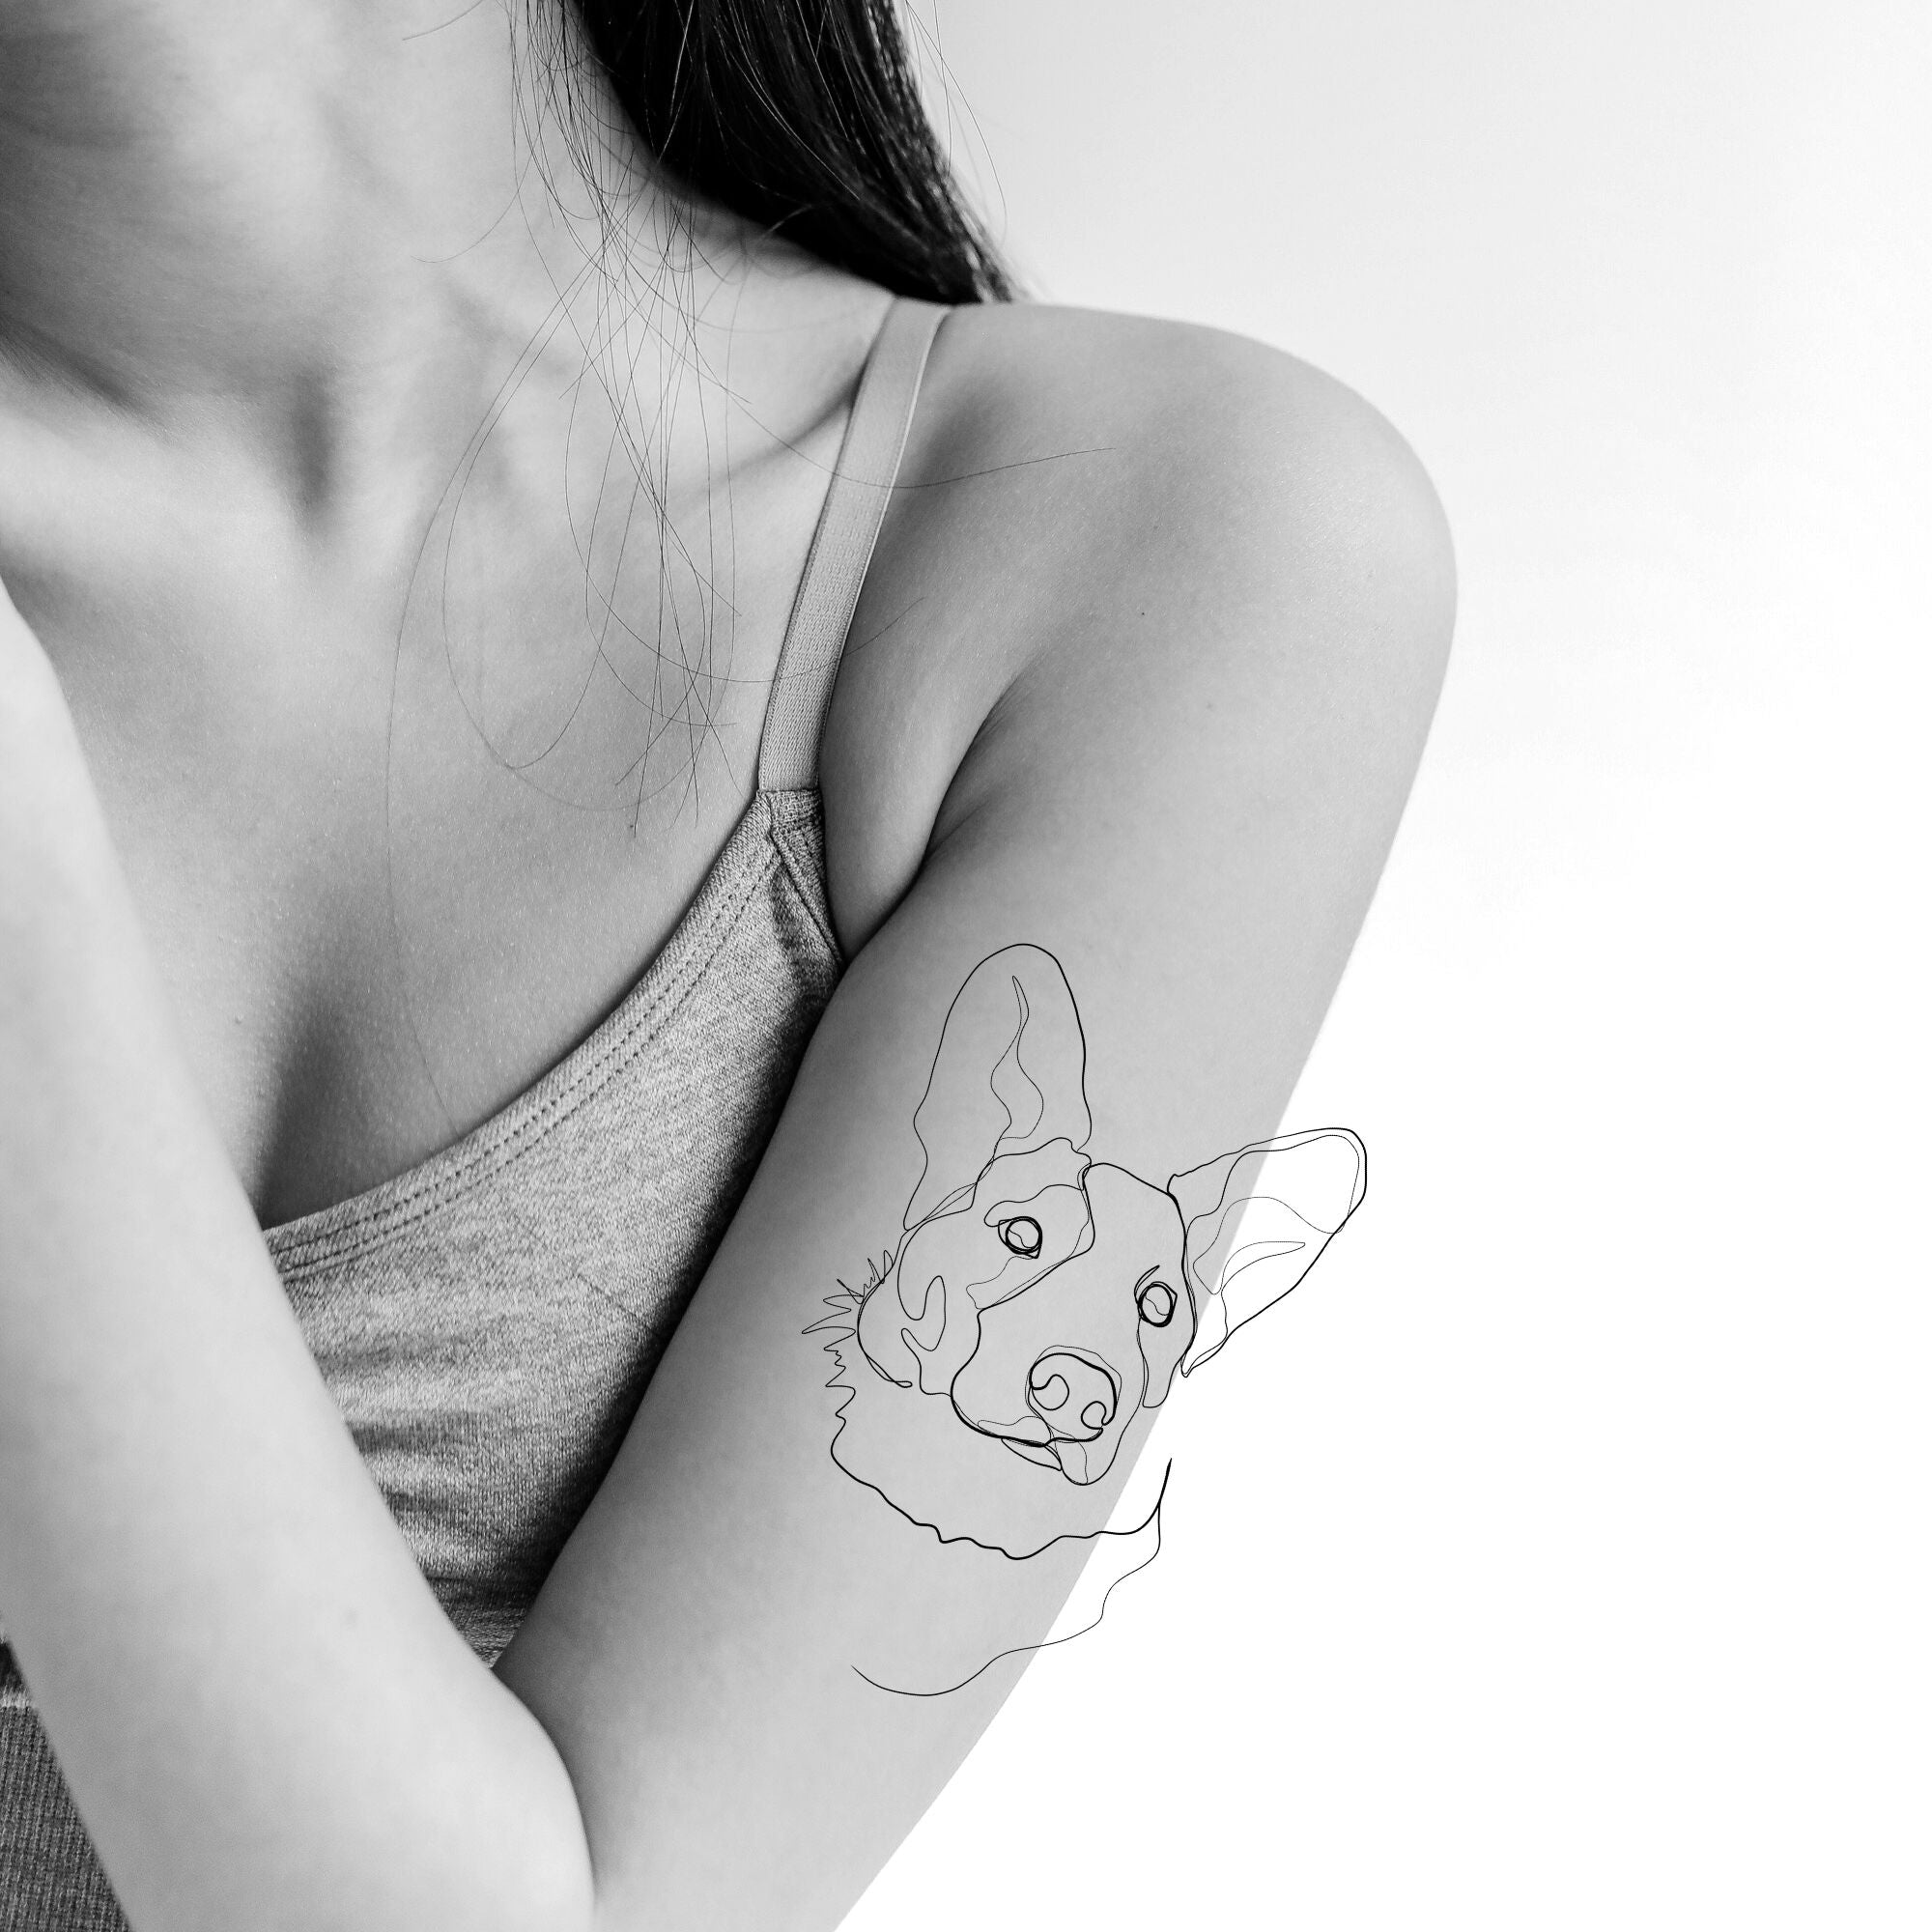 61 Single Line Tattoo Designs And Ideas To Get Inked | Line tattoos, Tattoo  designs, Single line tattoo